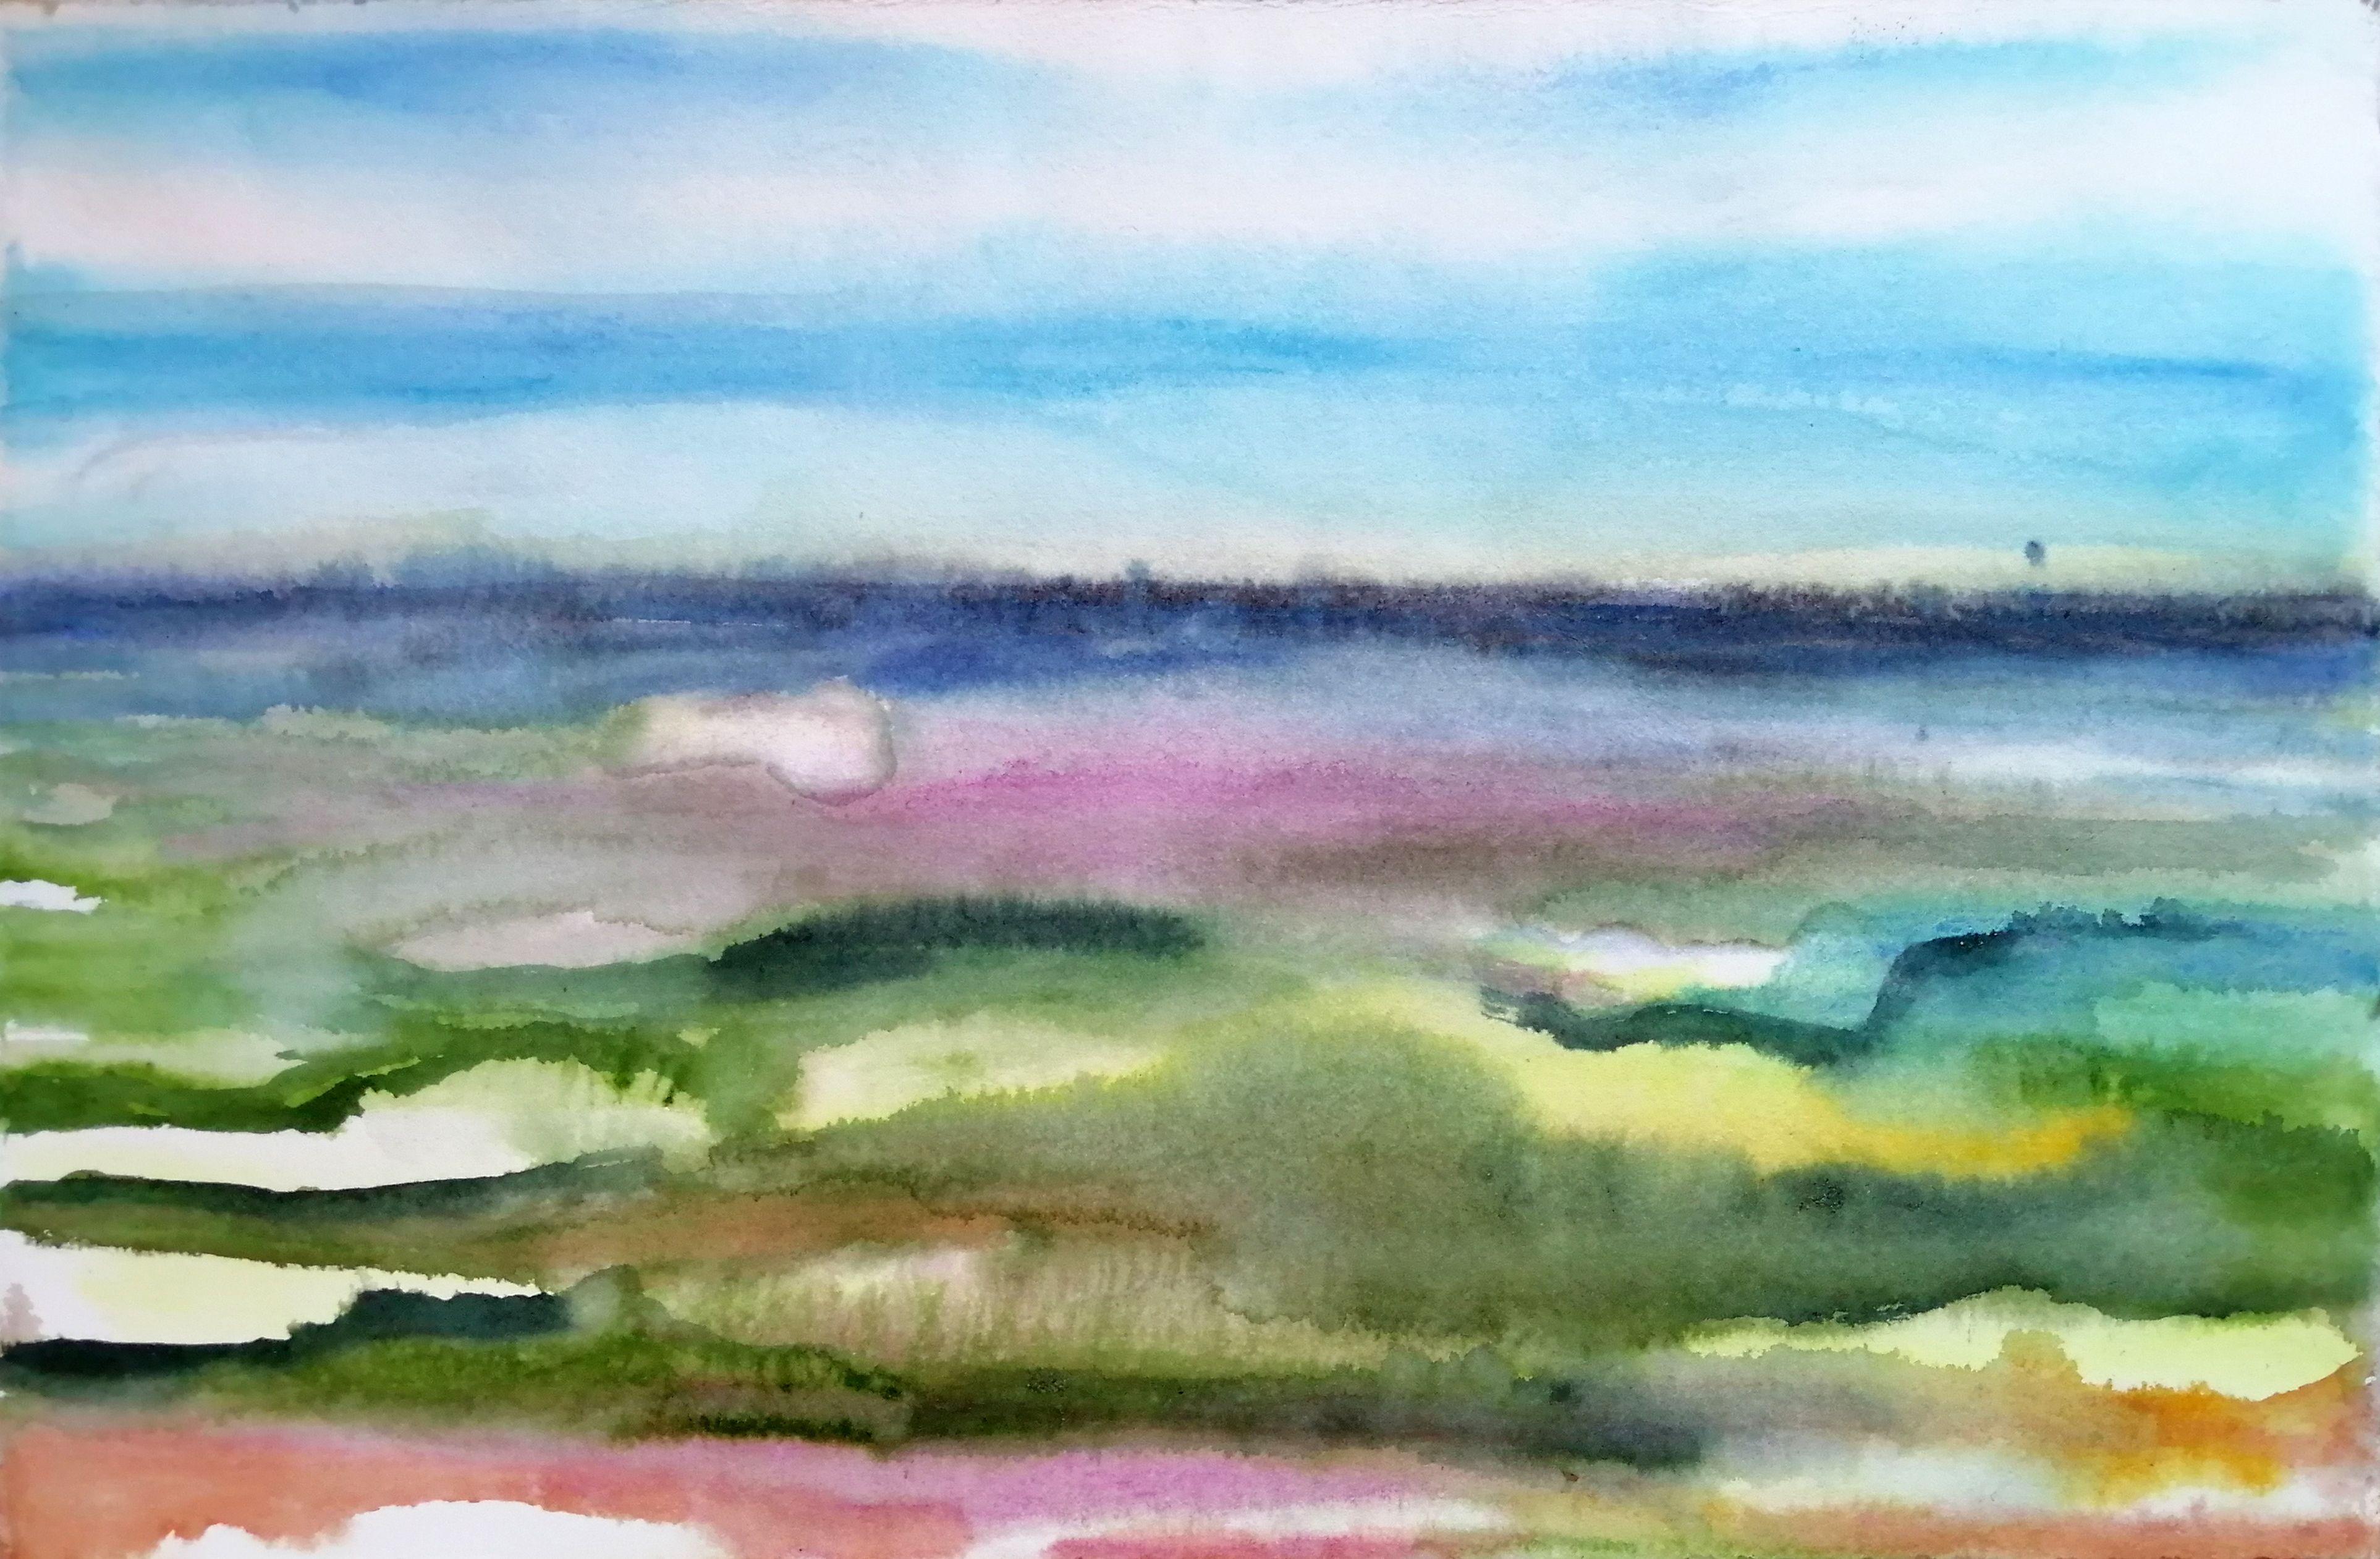 The Baltic Sea tlks to me, Painting, Watercolor on Watercolor Paper - Art by Marko Fenske